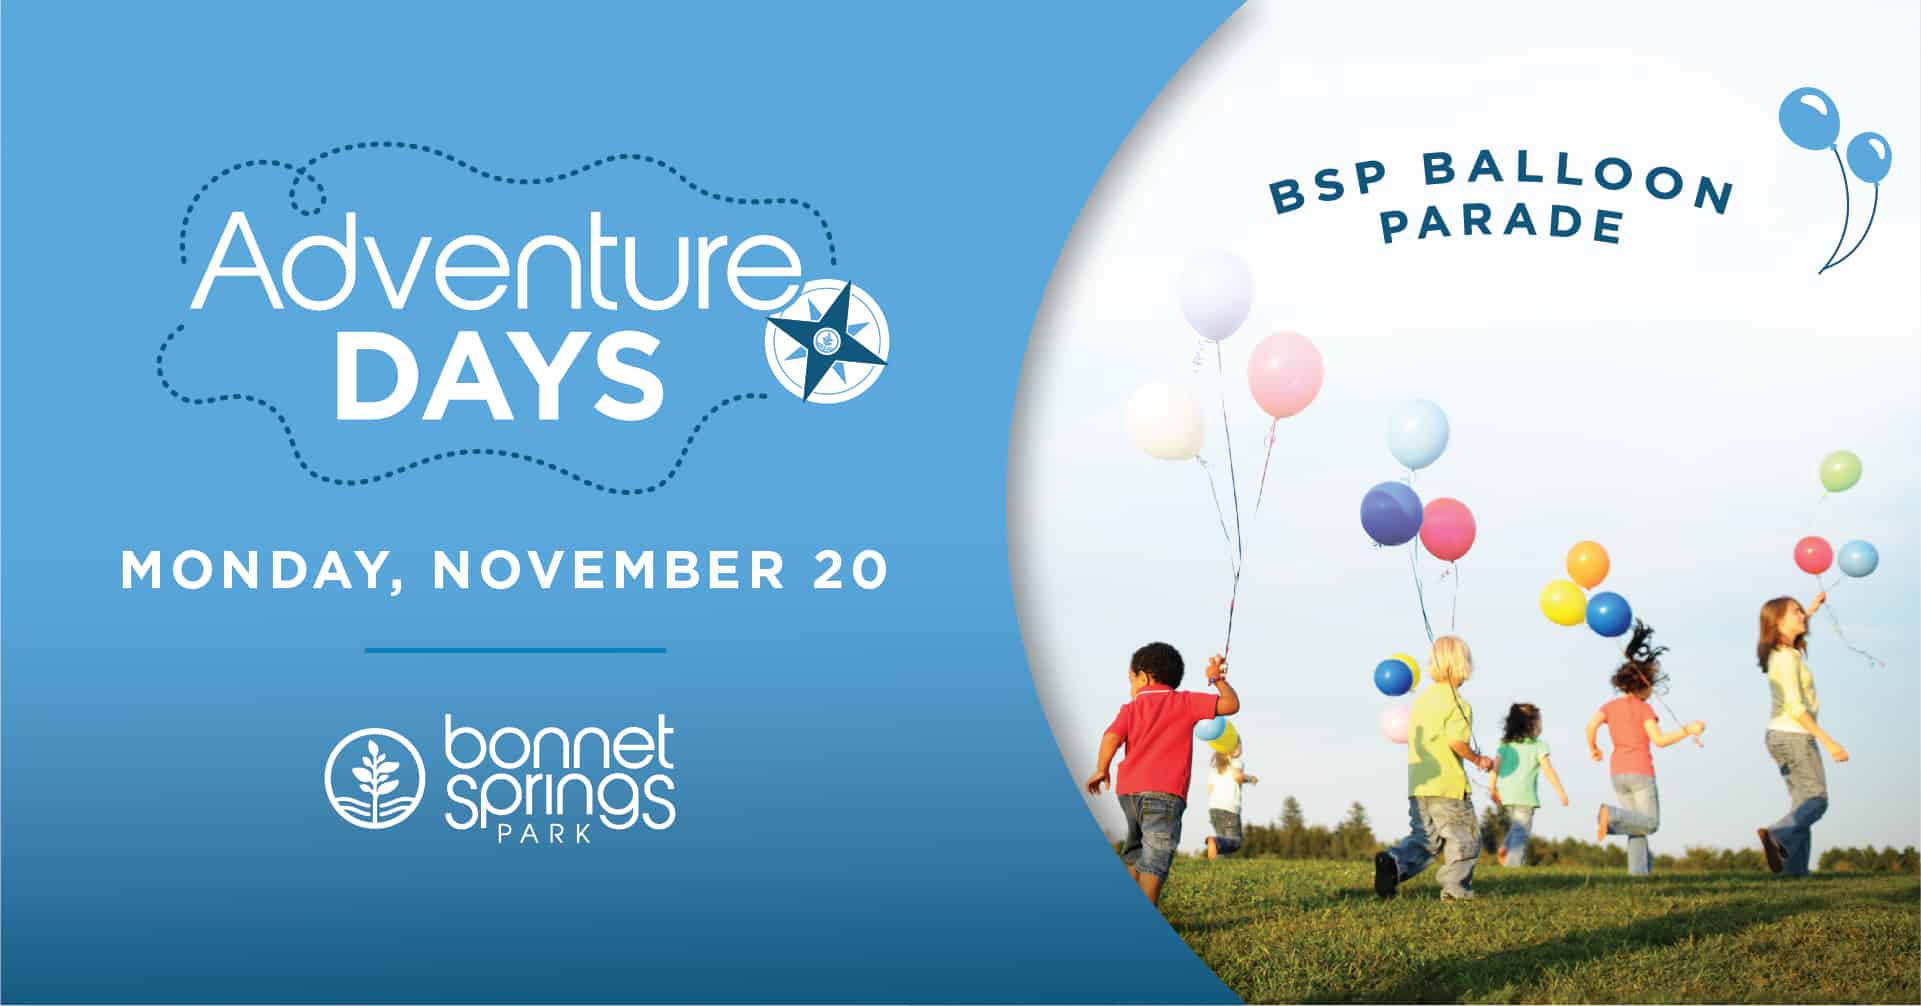 BSP-1023-502 November 20 THANKSGIVING Adventure Day Graphic_Event Cover